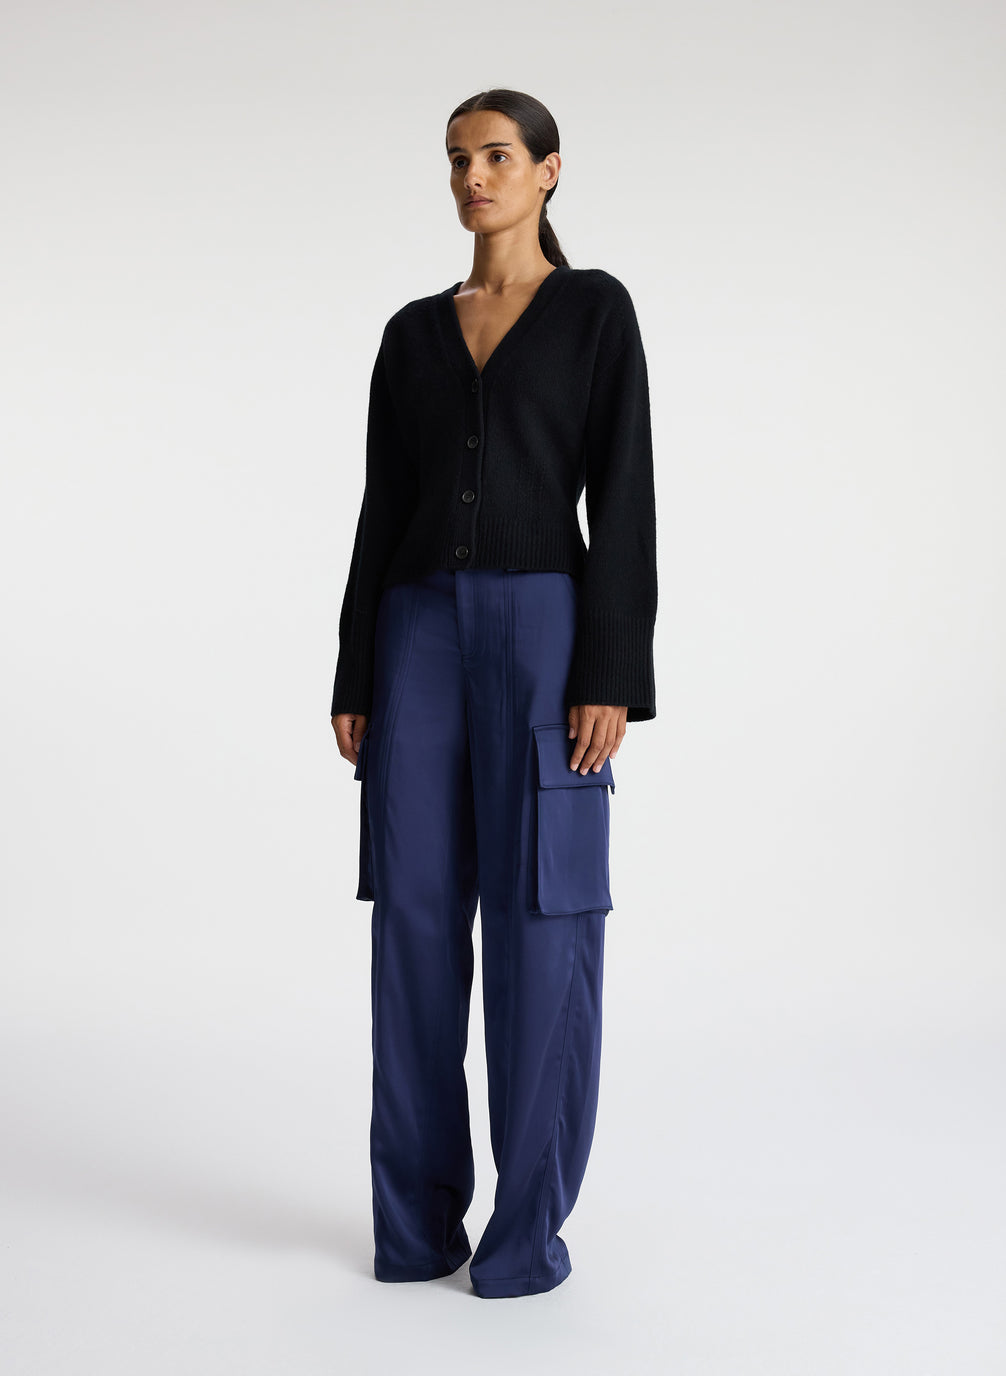 side view of woman wearing black cardigan with navy blue cargo pants